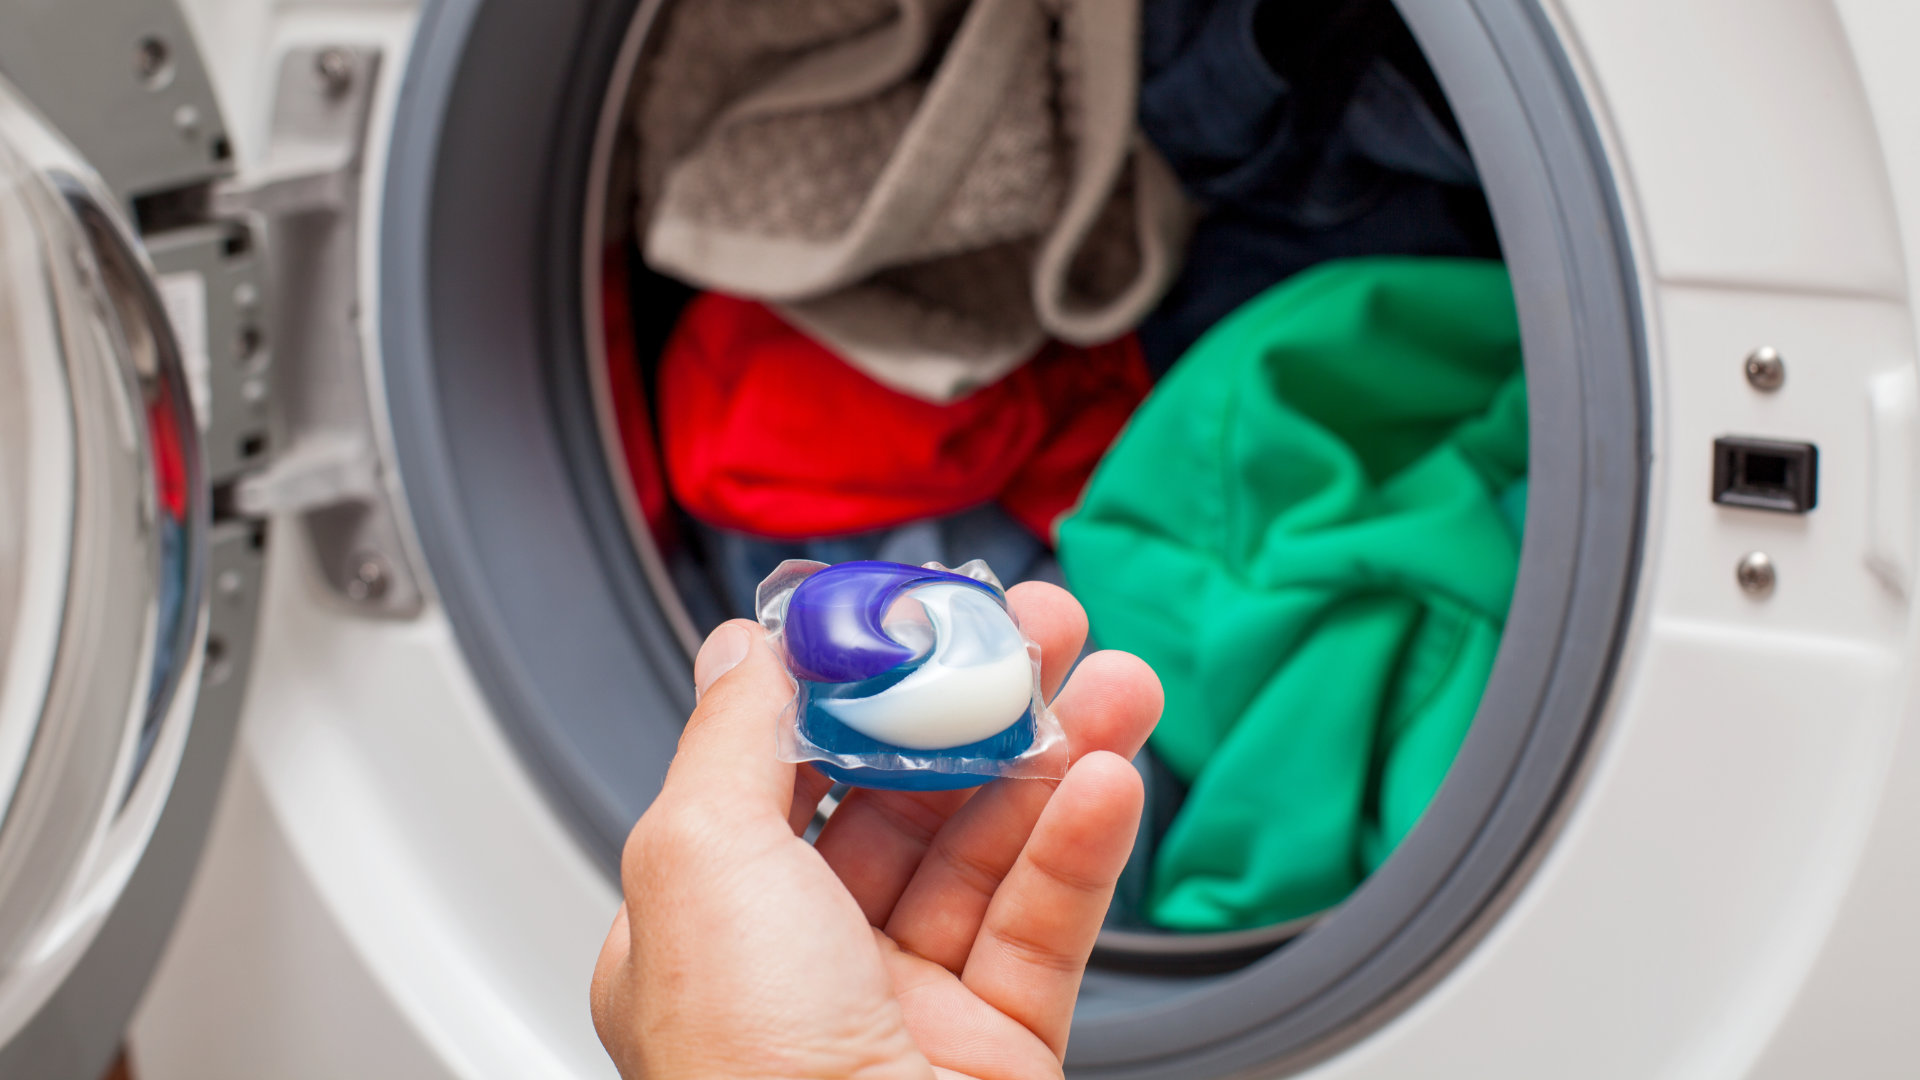 Featured image for “Laundry Pods Not Dissolving in The Washer? How To Fix It”